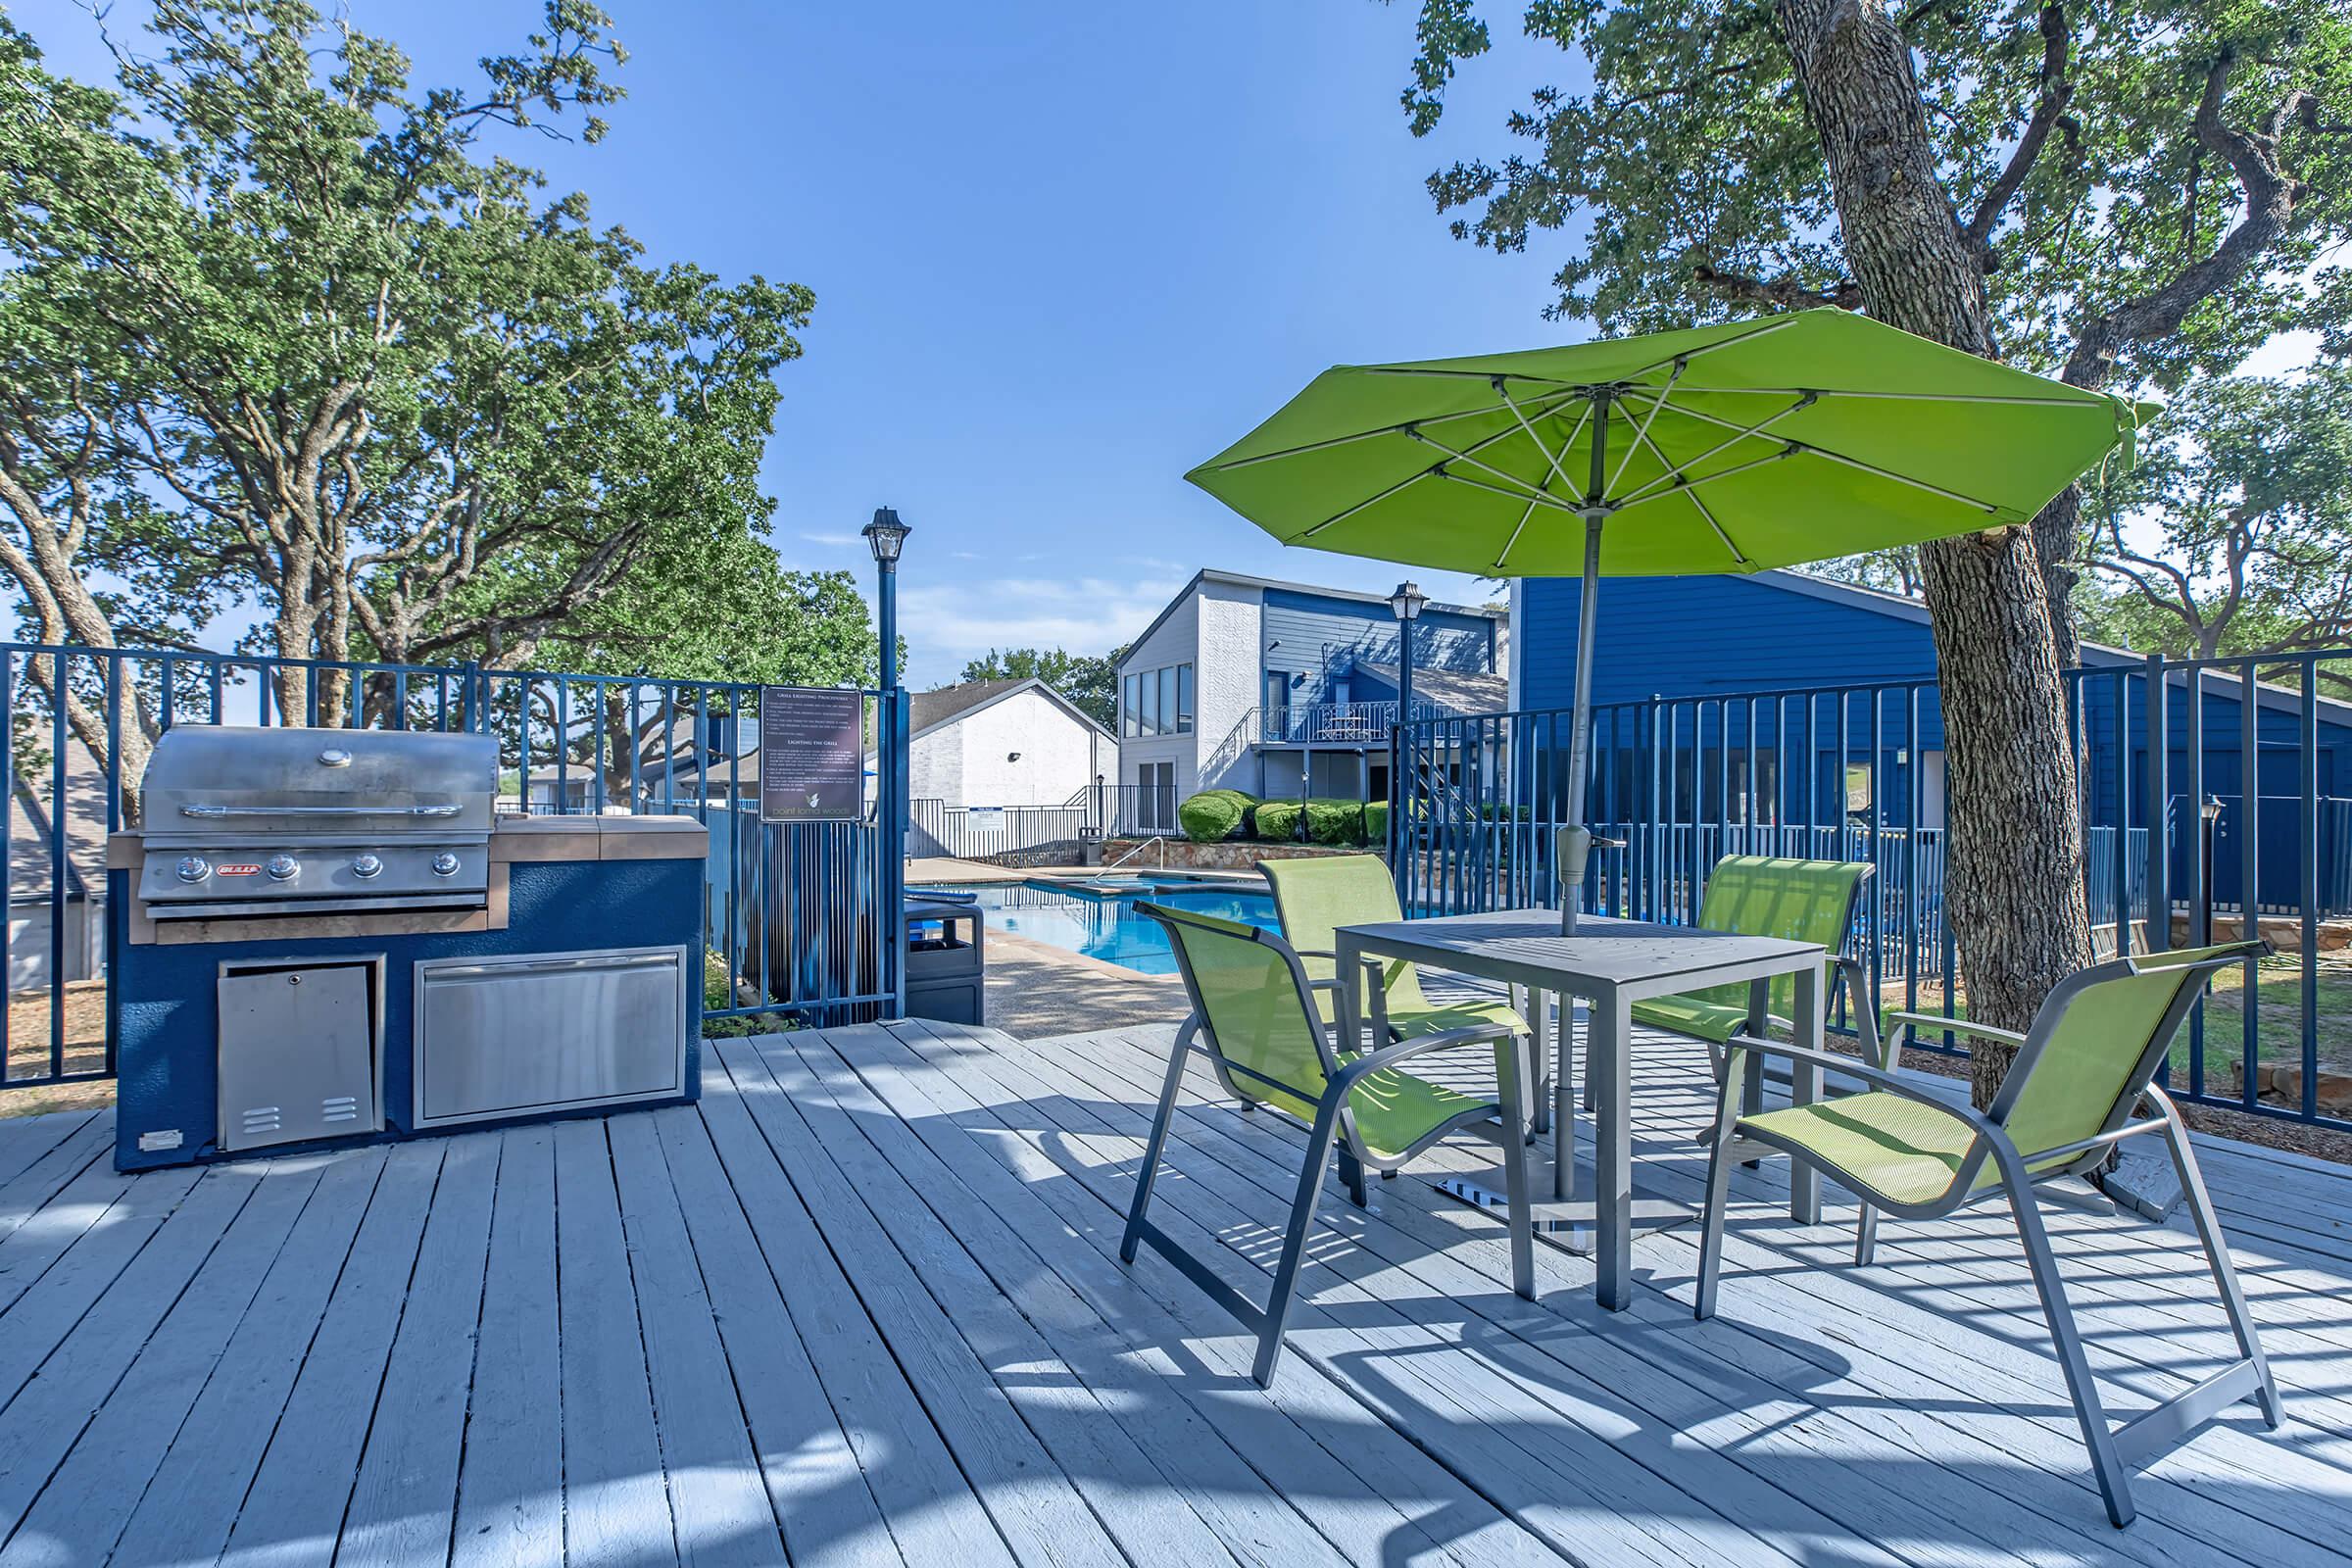 "Outdoor pool deck with a gas grill and lawn chairs and table under an umbrella